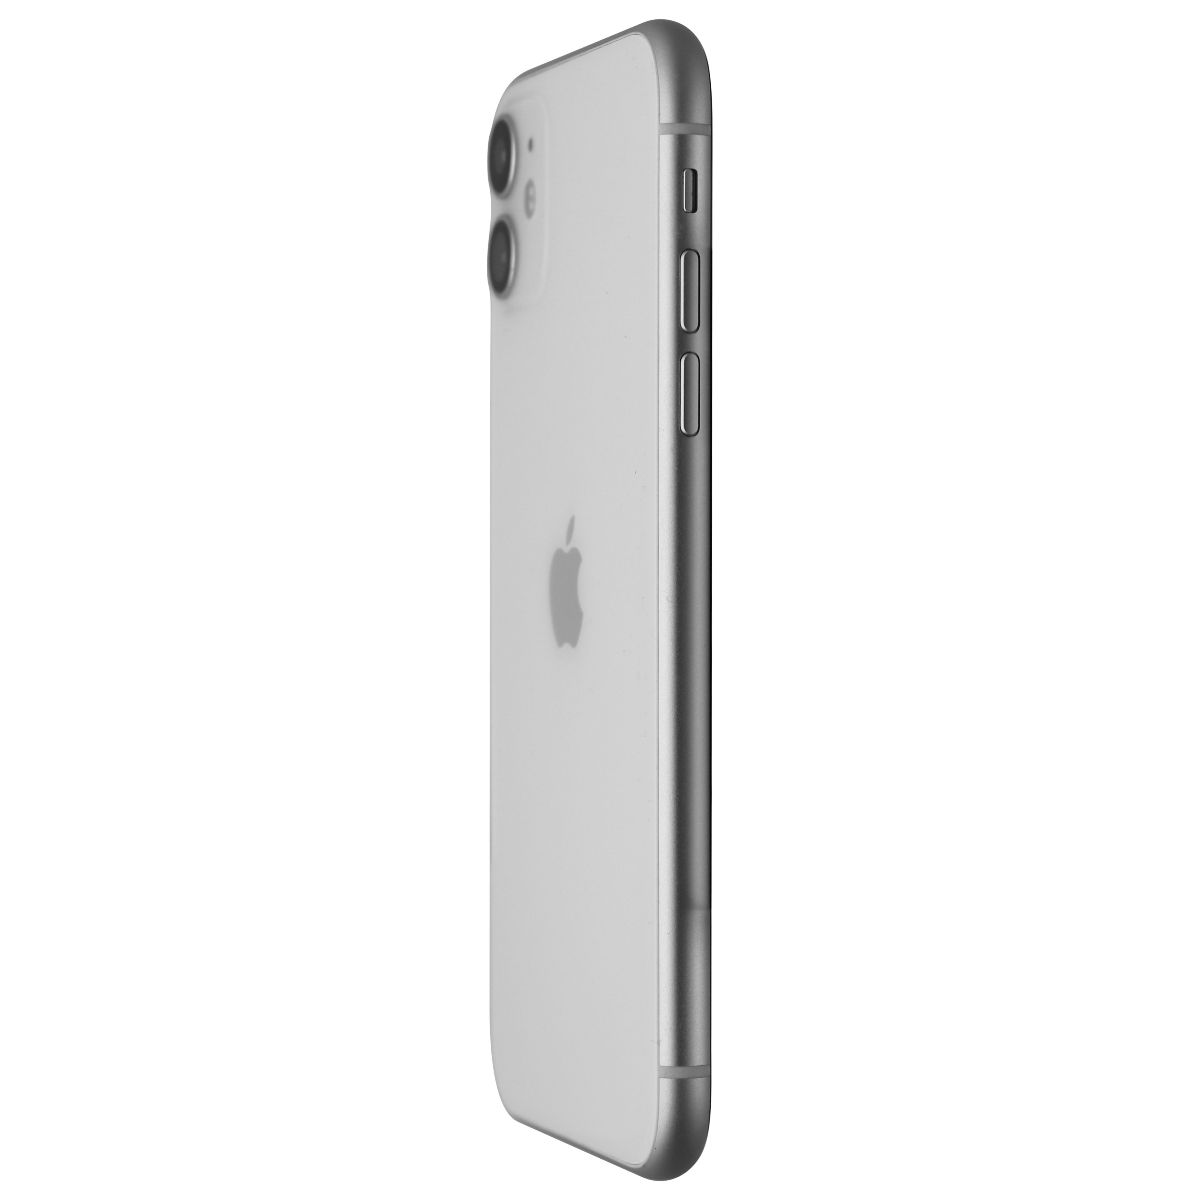 Apple iPhone 11 (6.1-in) (A2111) Unlocked - 64GB / White - Bad Face ID* Cell Phones & Smartphones Apple    - Simple Cell Bulk Wholesale Pricing - USA Seller